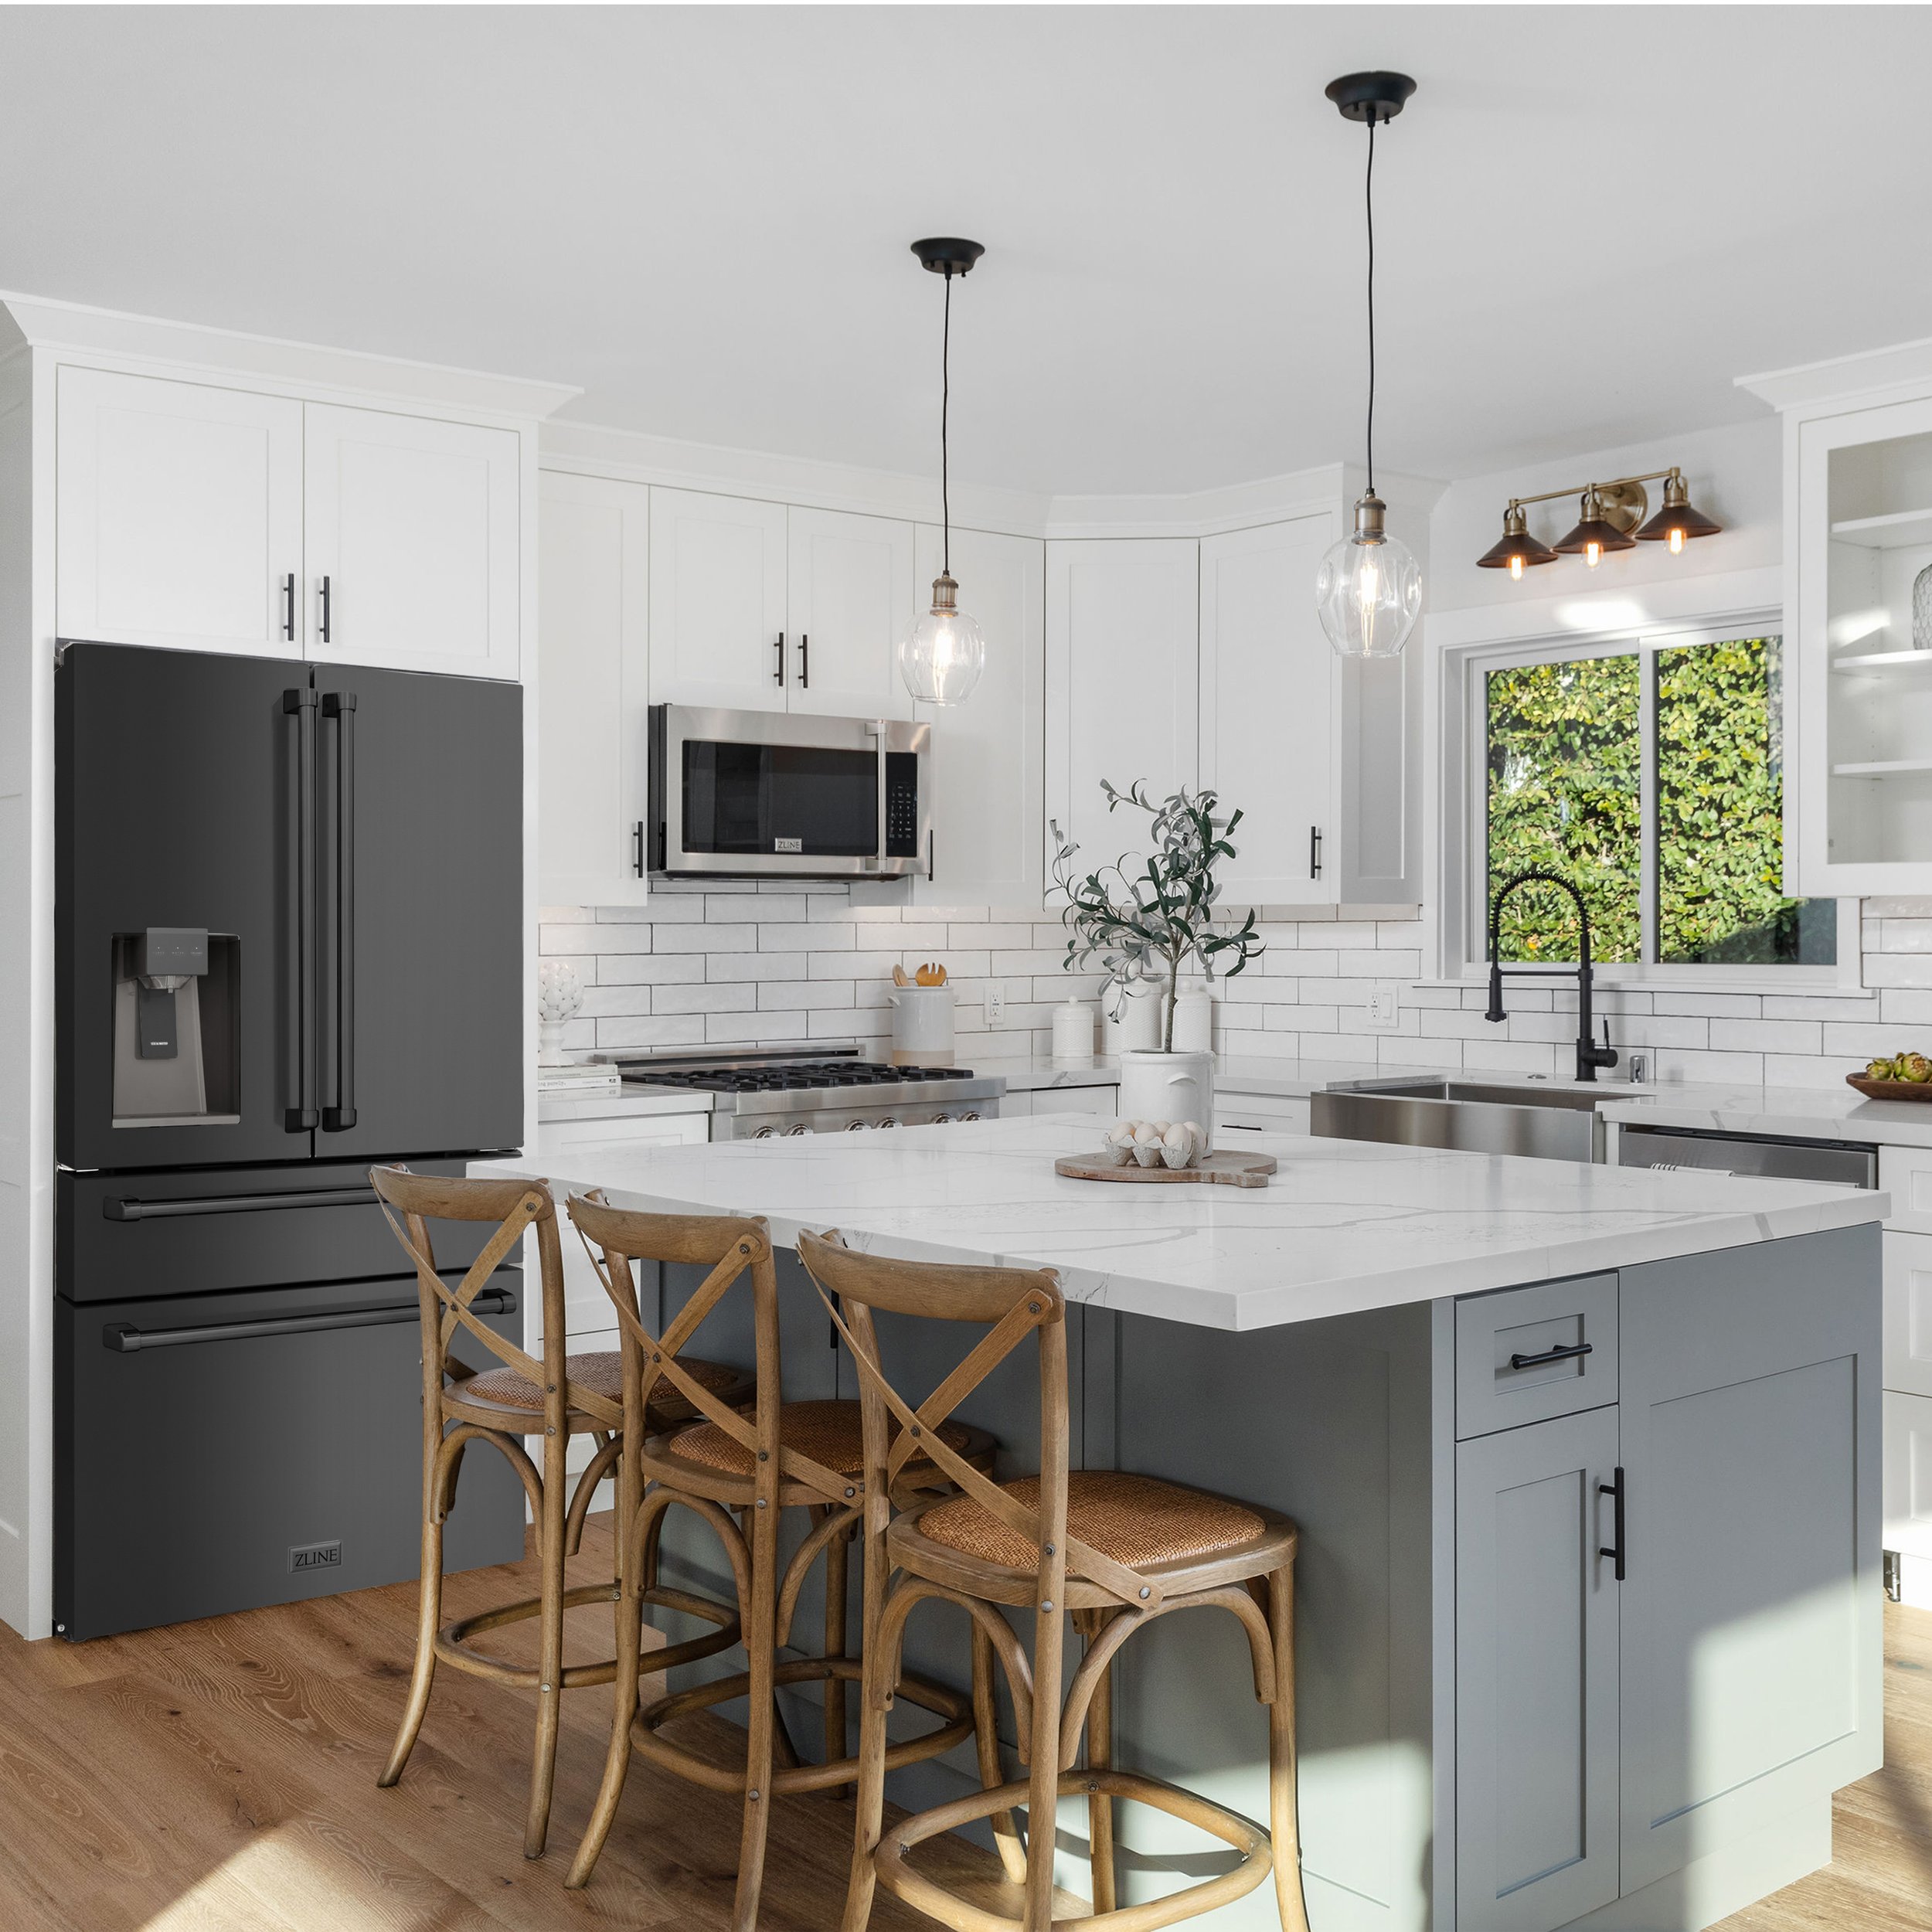 6 Cabinet Colors that Go With Black Stainless Steel Appliances